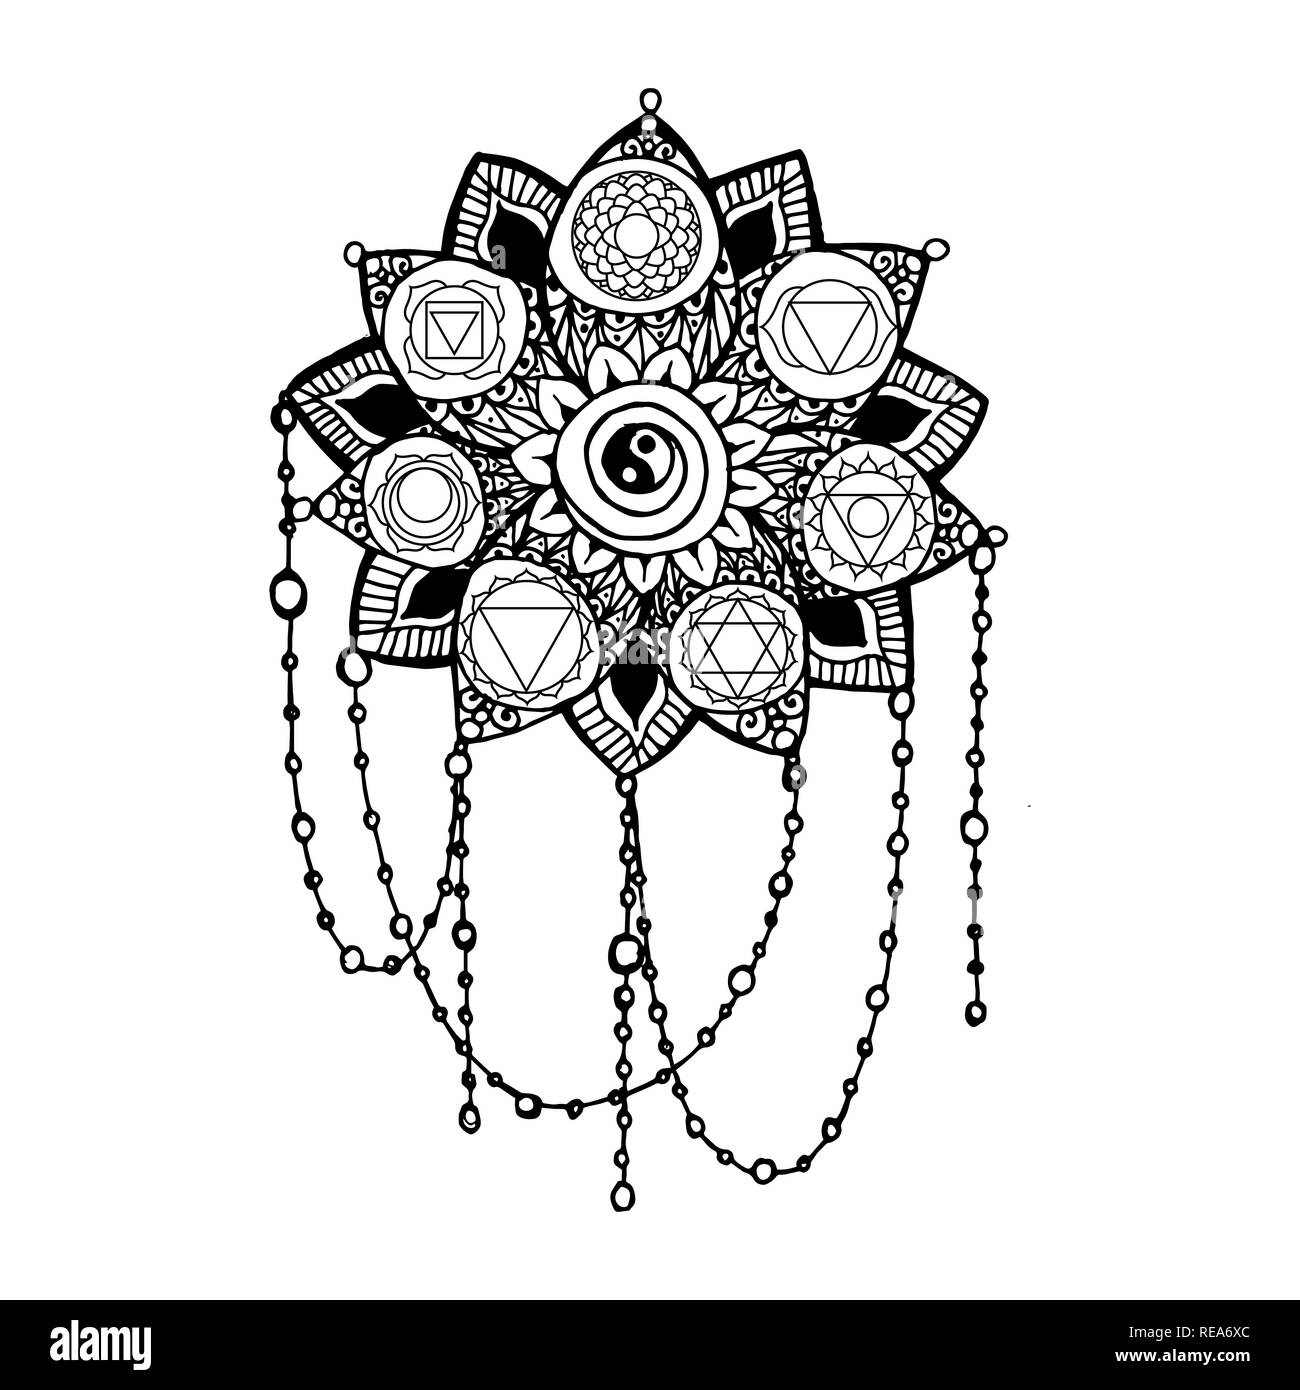 Doodle style monochrome black line art lotus with yoga chakras pictogram. Vector illustration for print design, adult coloring page template Stock Vector